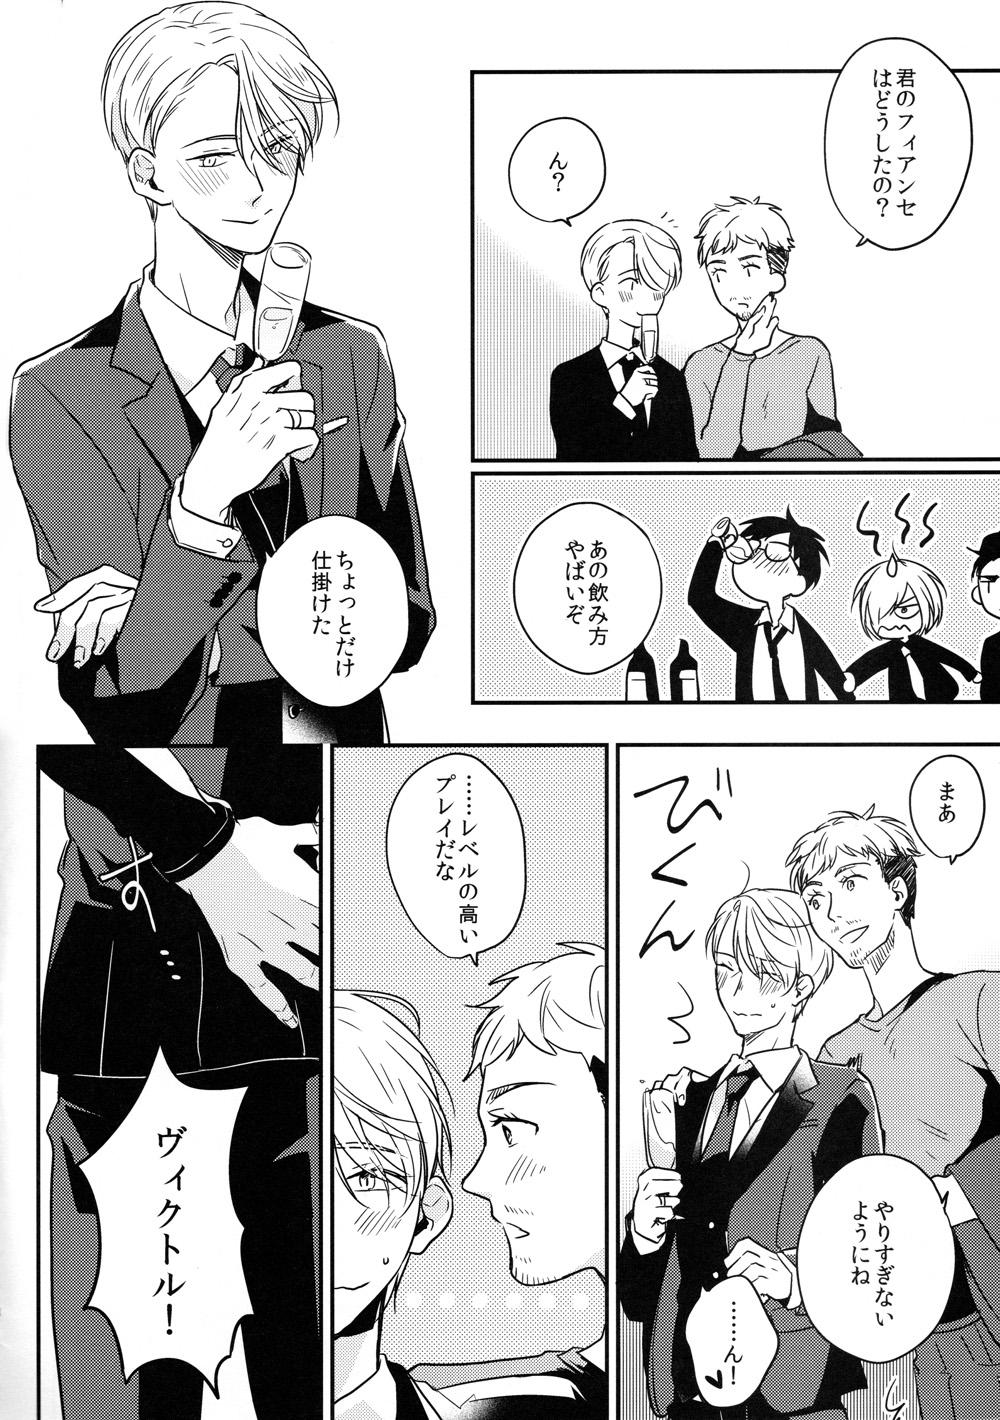 Milf Sex #atbanquet - Yuri on ice Gay Pissing - Page 9